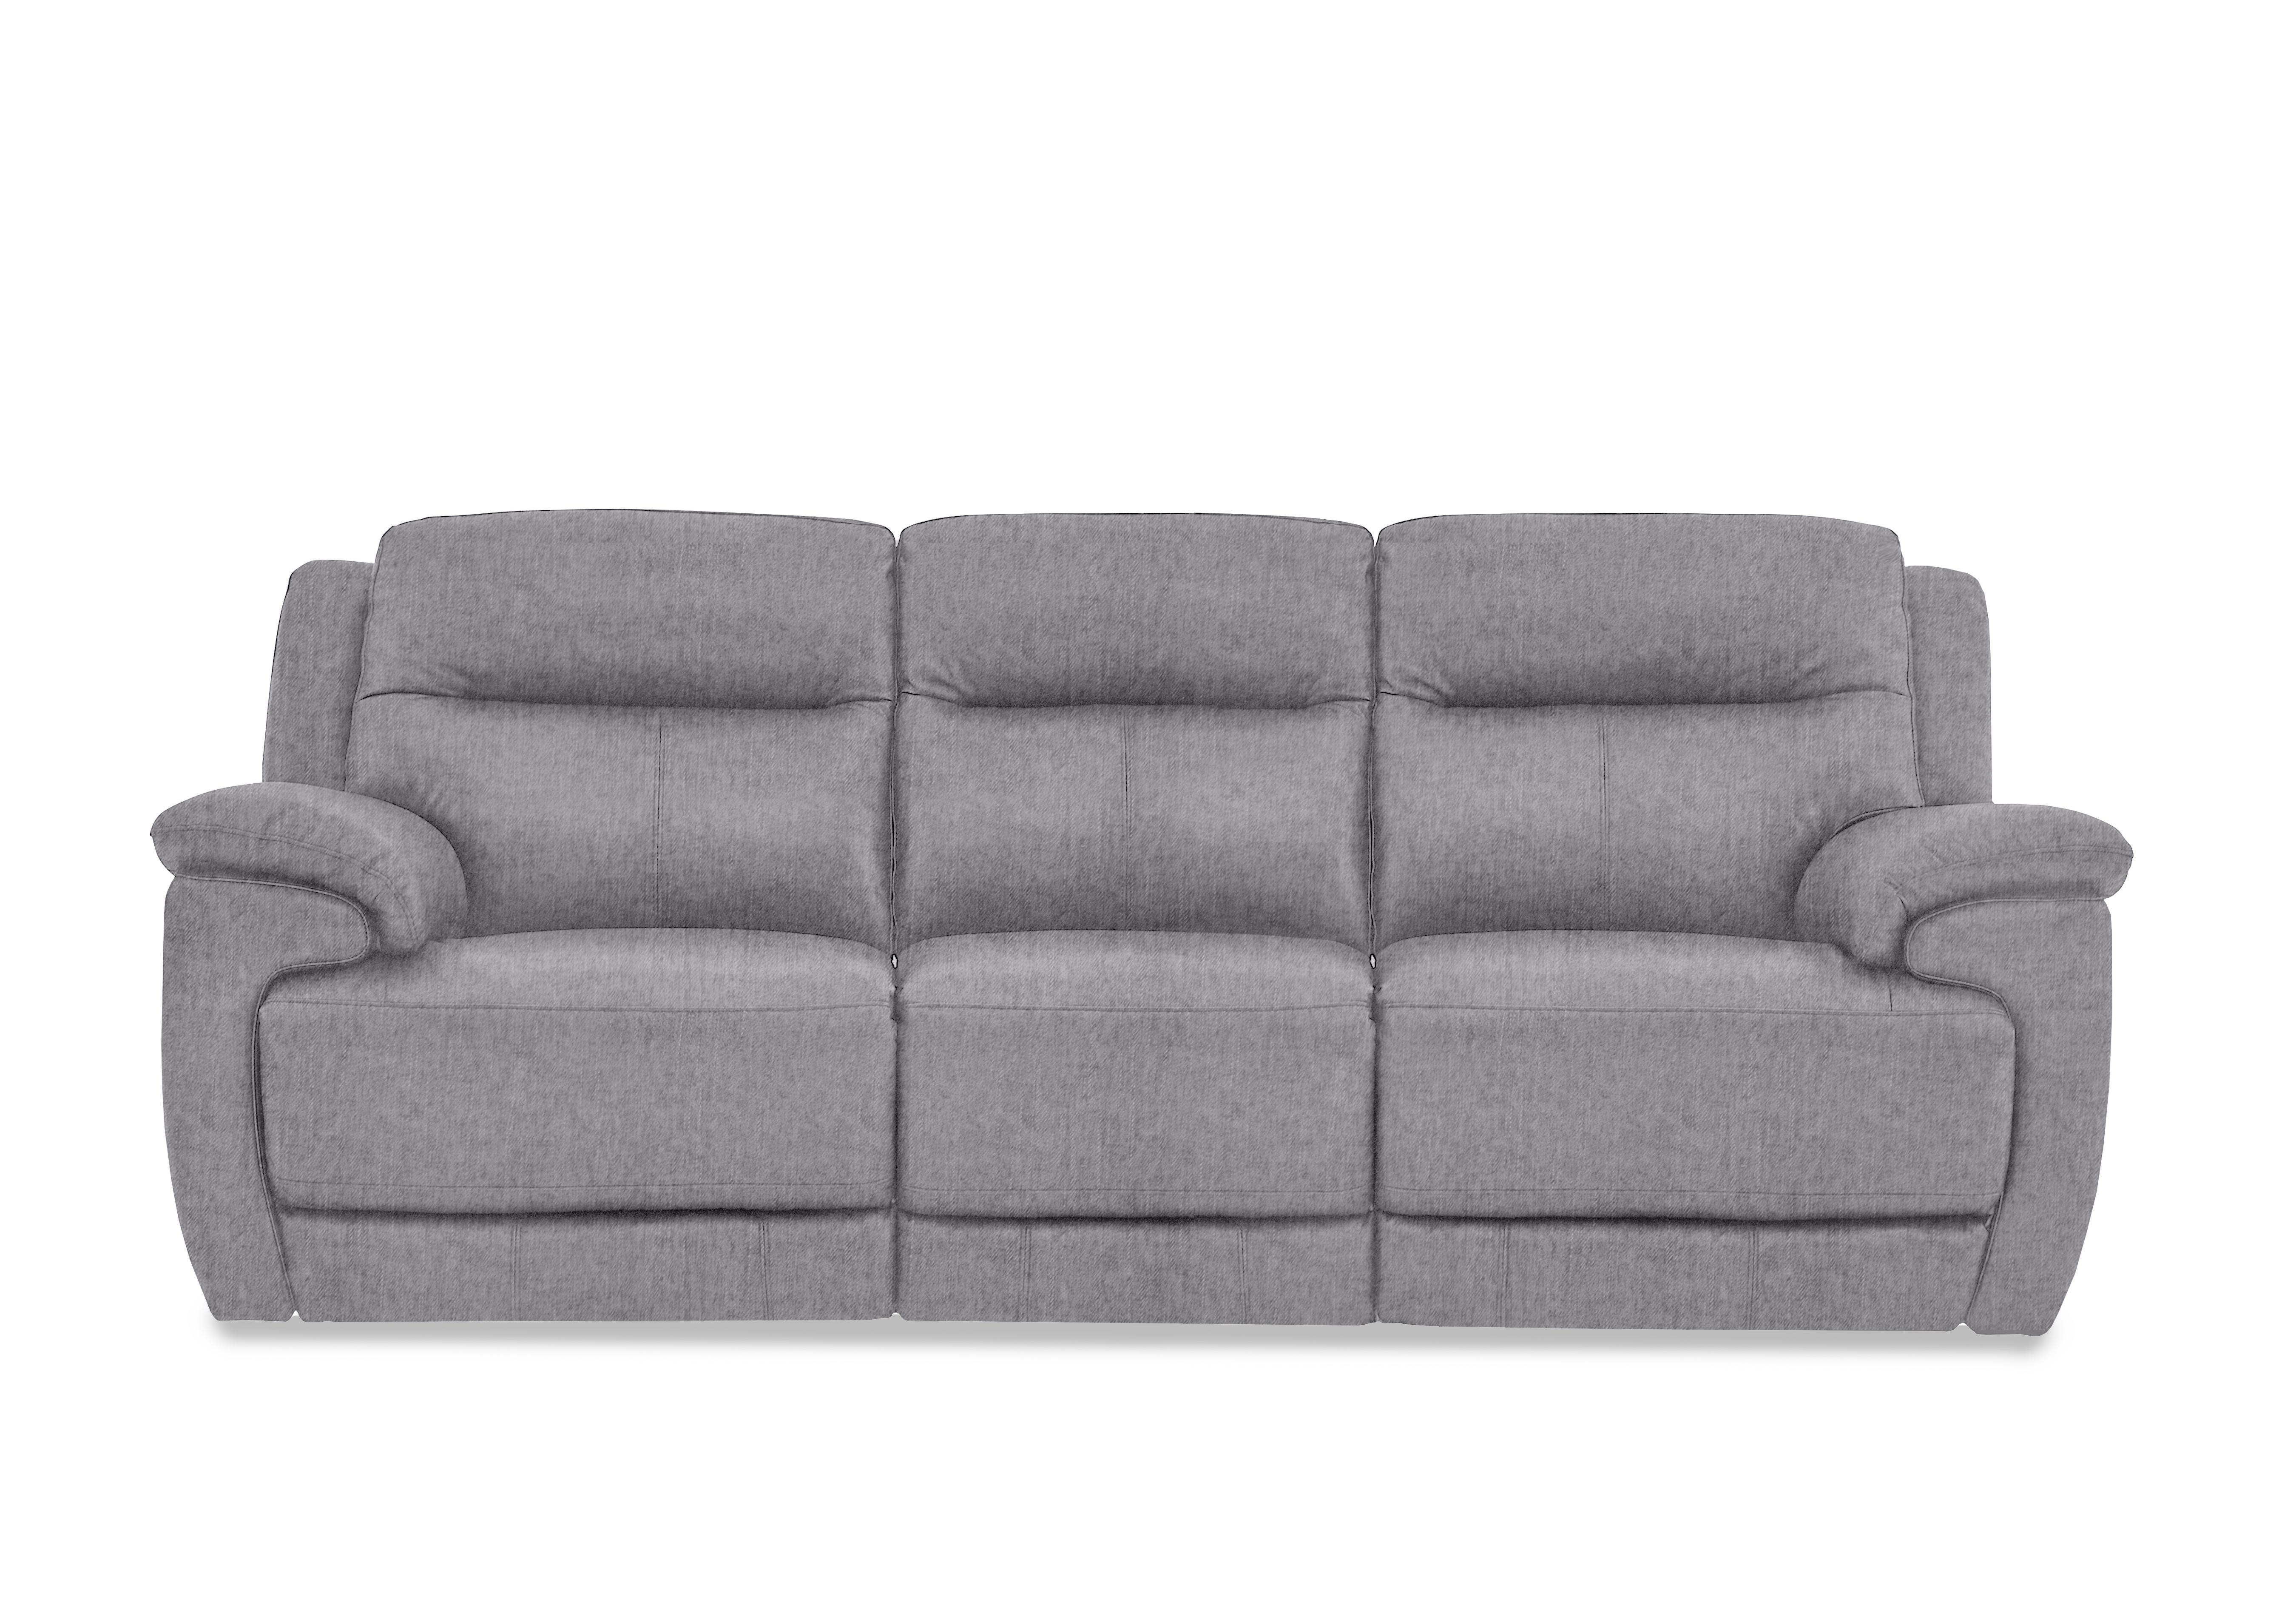 Touch 3 Seater Heavy Duty Fabric Sofa in Fab-Meo-R27 Pewter on Furniture Village